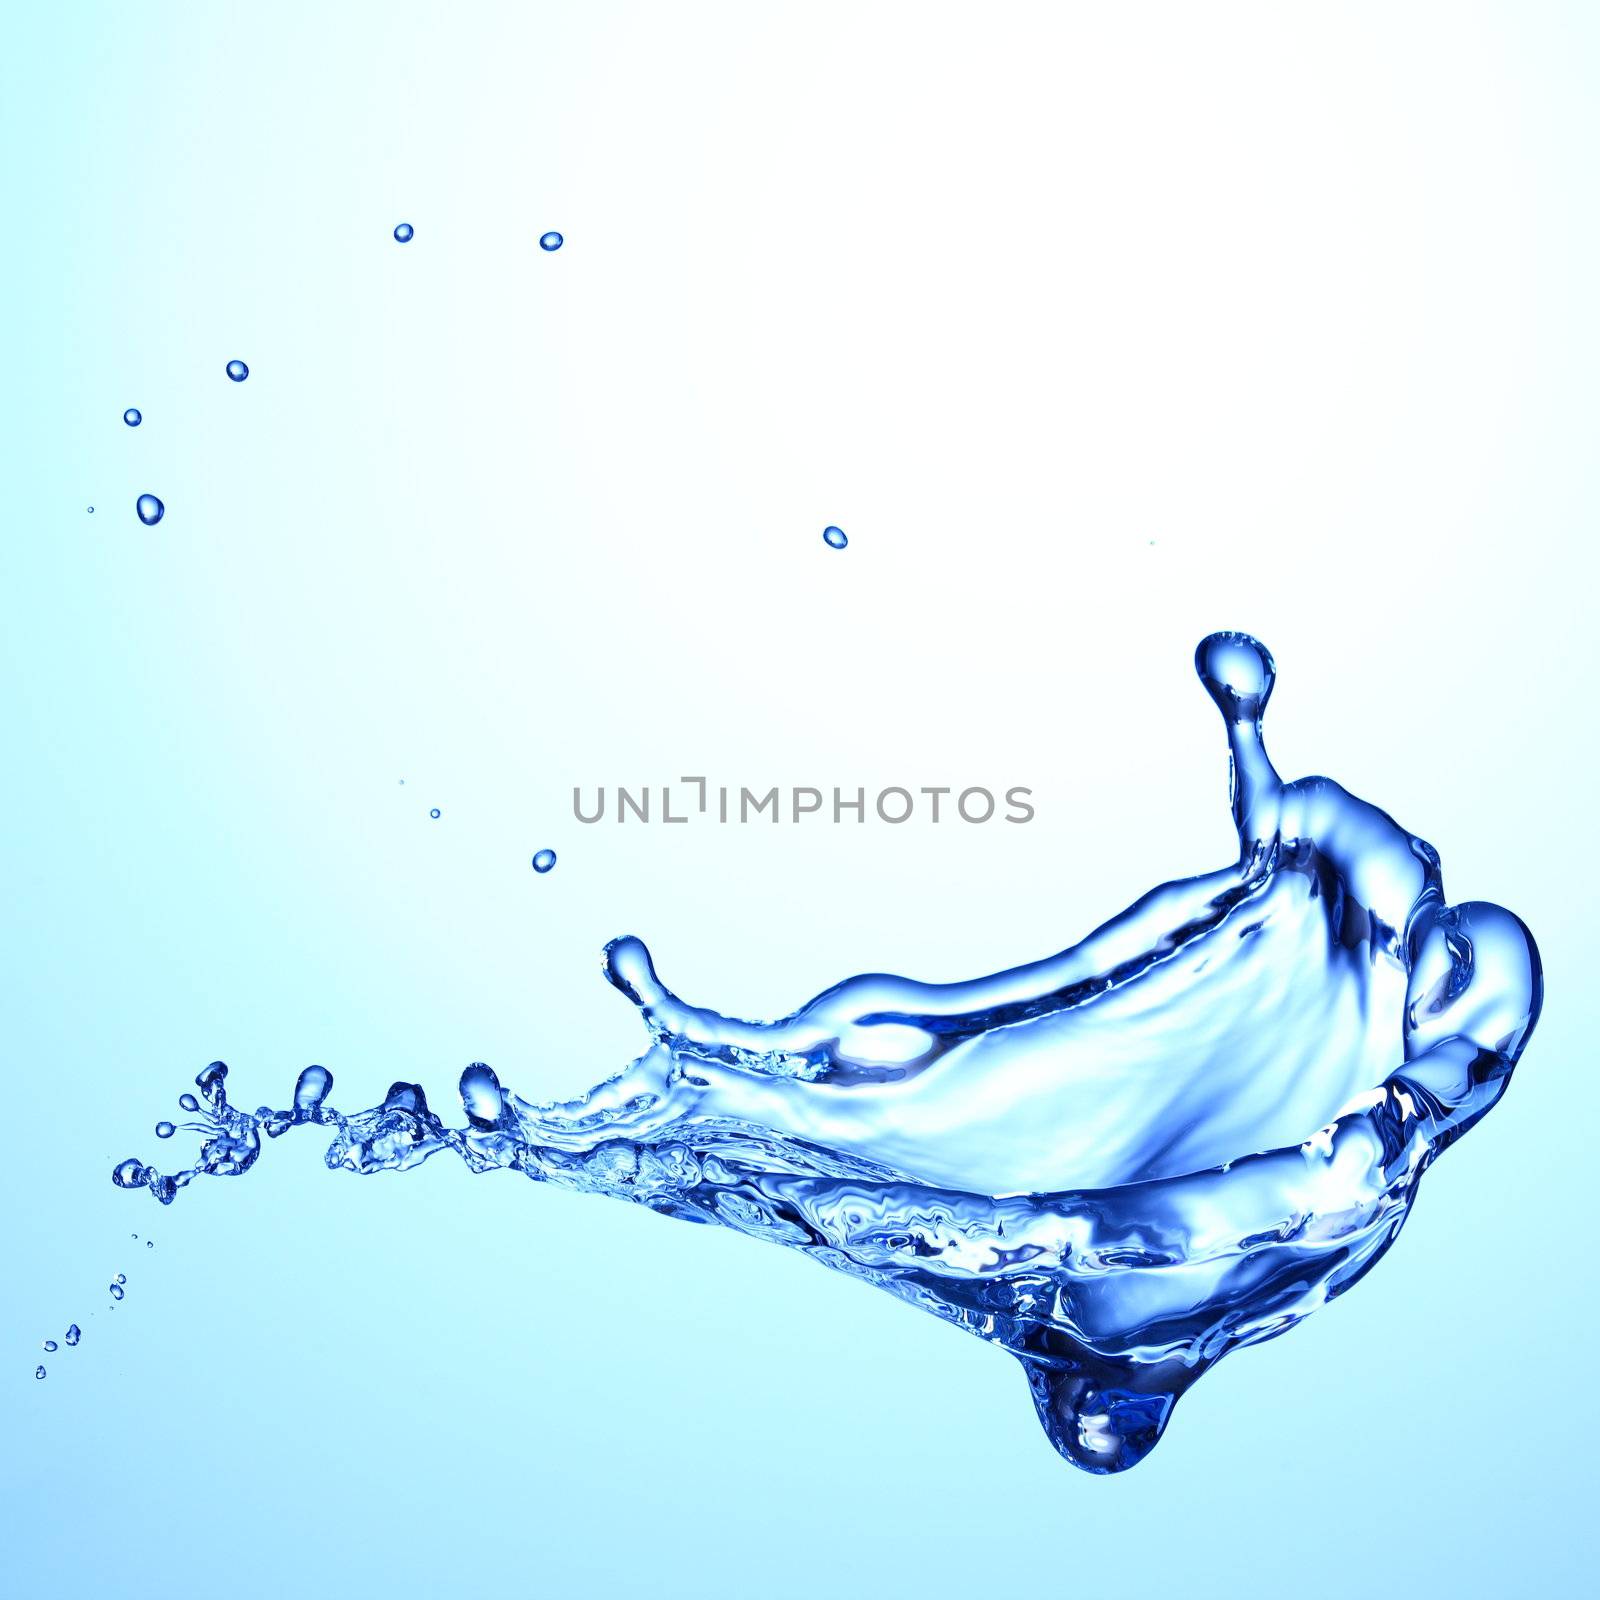 Water splash. Blue water splash closeup texture background with copy space. Blue and white background. Photo.